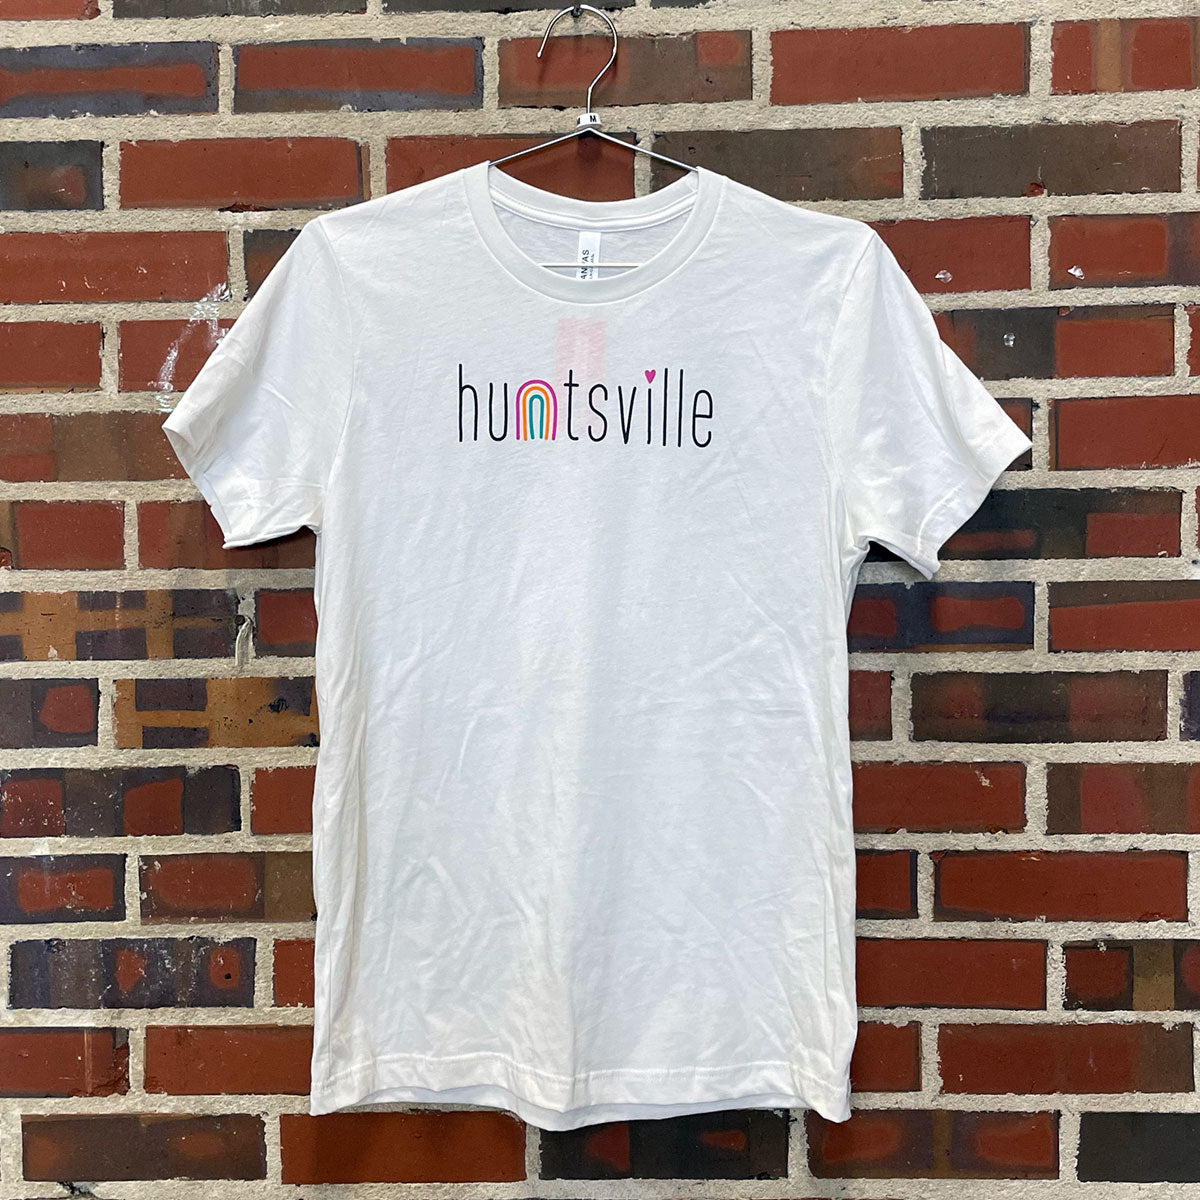 the text "huntsville" with a rainbow as the n design on a t-shirt against a red brick wall